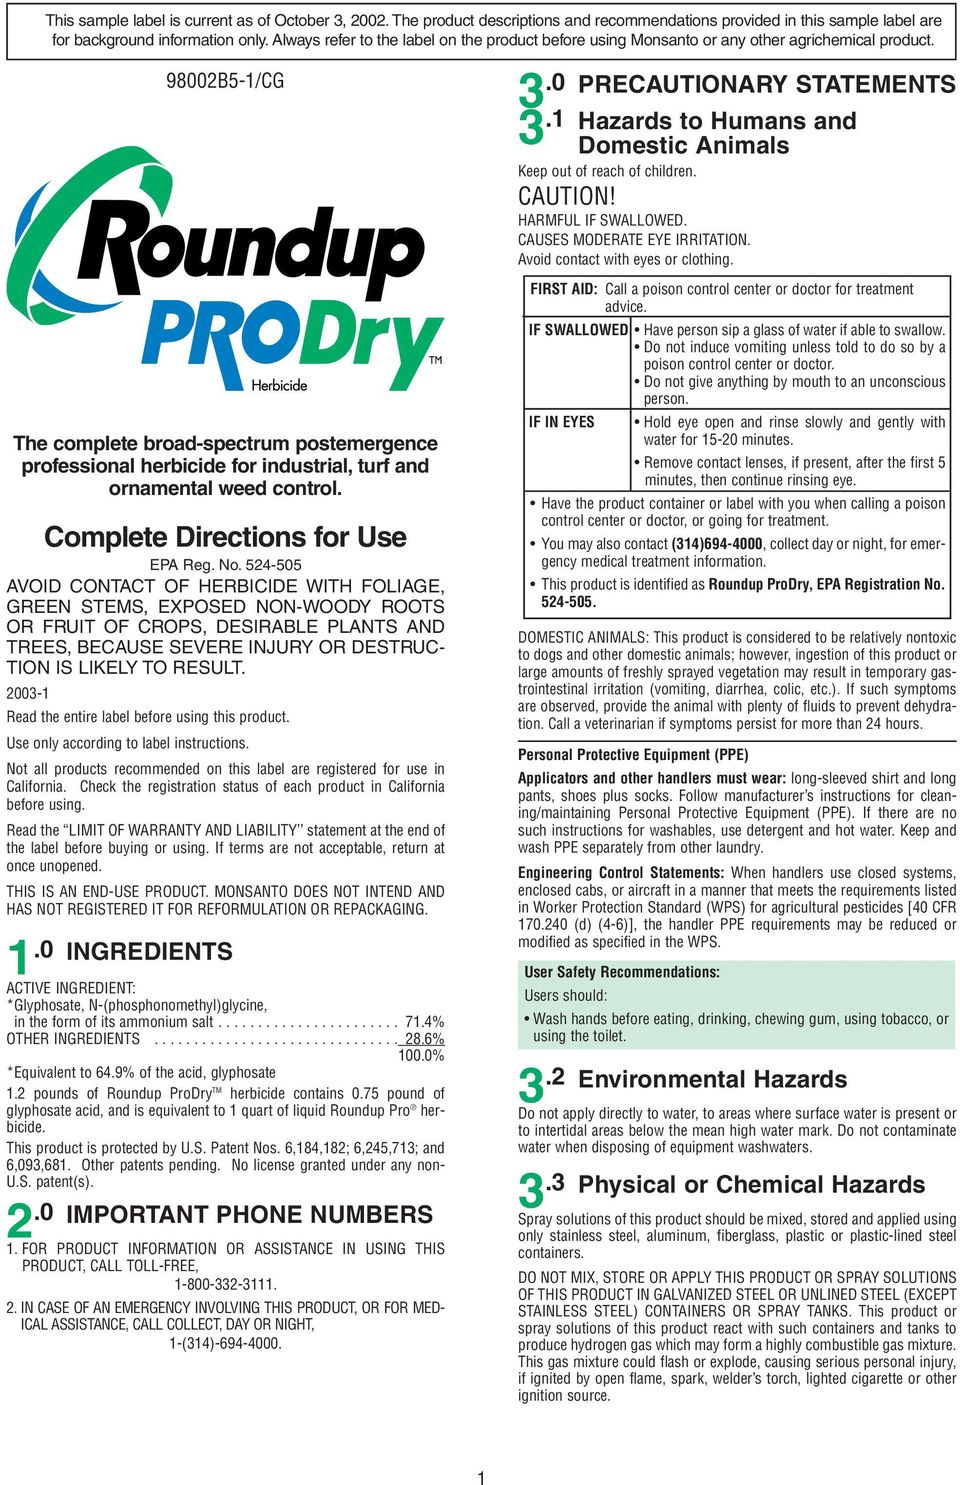 98002B5-1/CG The complete broad-spectrum postemergence professional herbicide for industrial, turf and ornamental weed control. Complete Directions for Use EPA Reg. No.